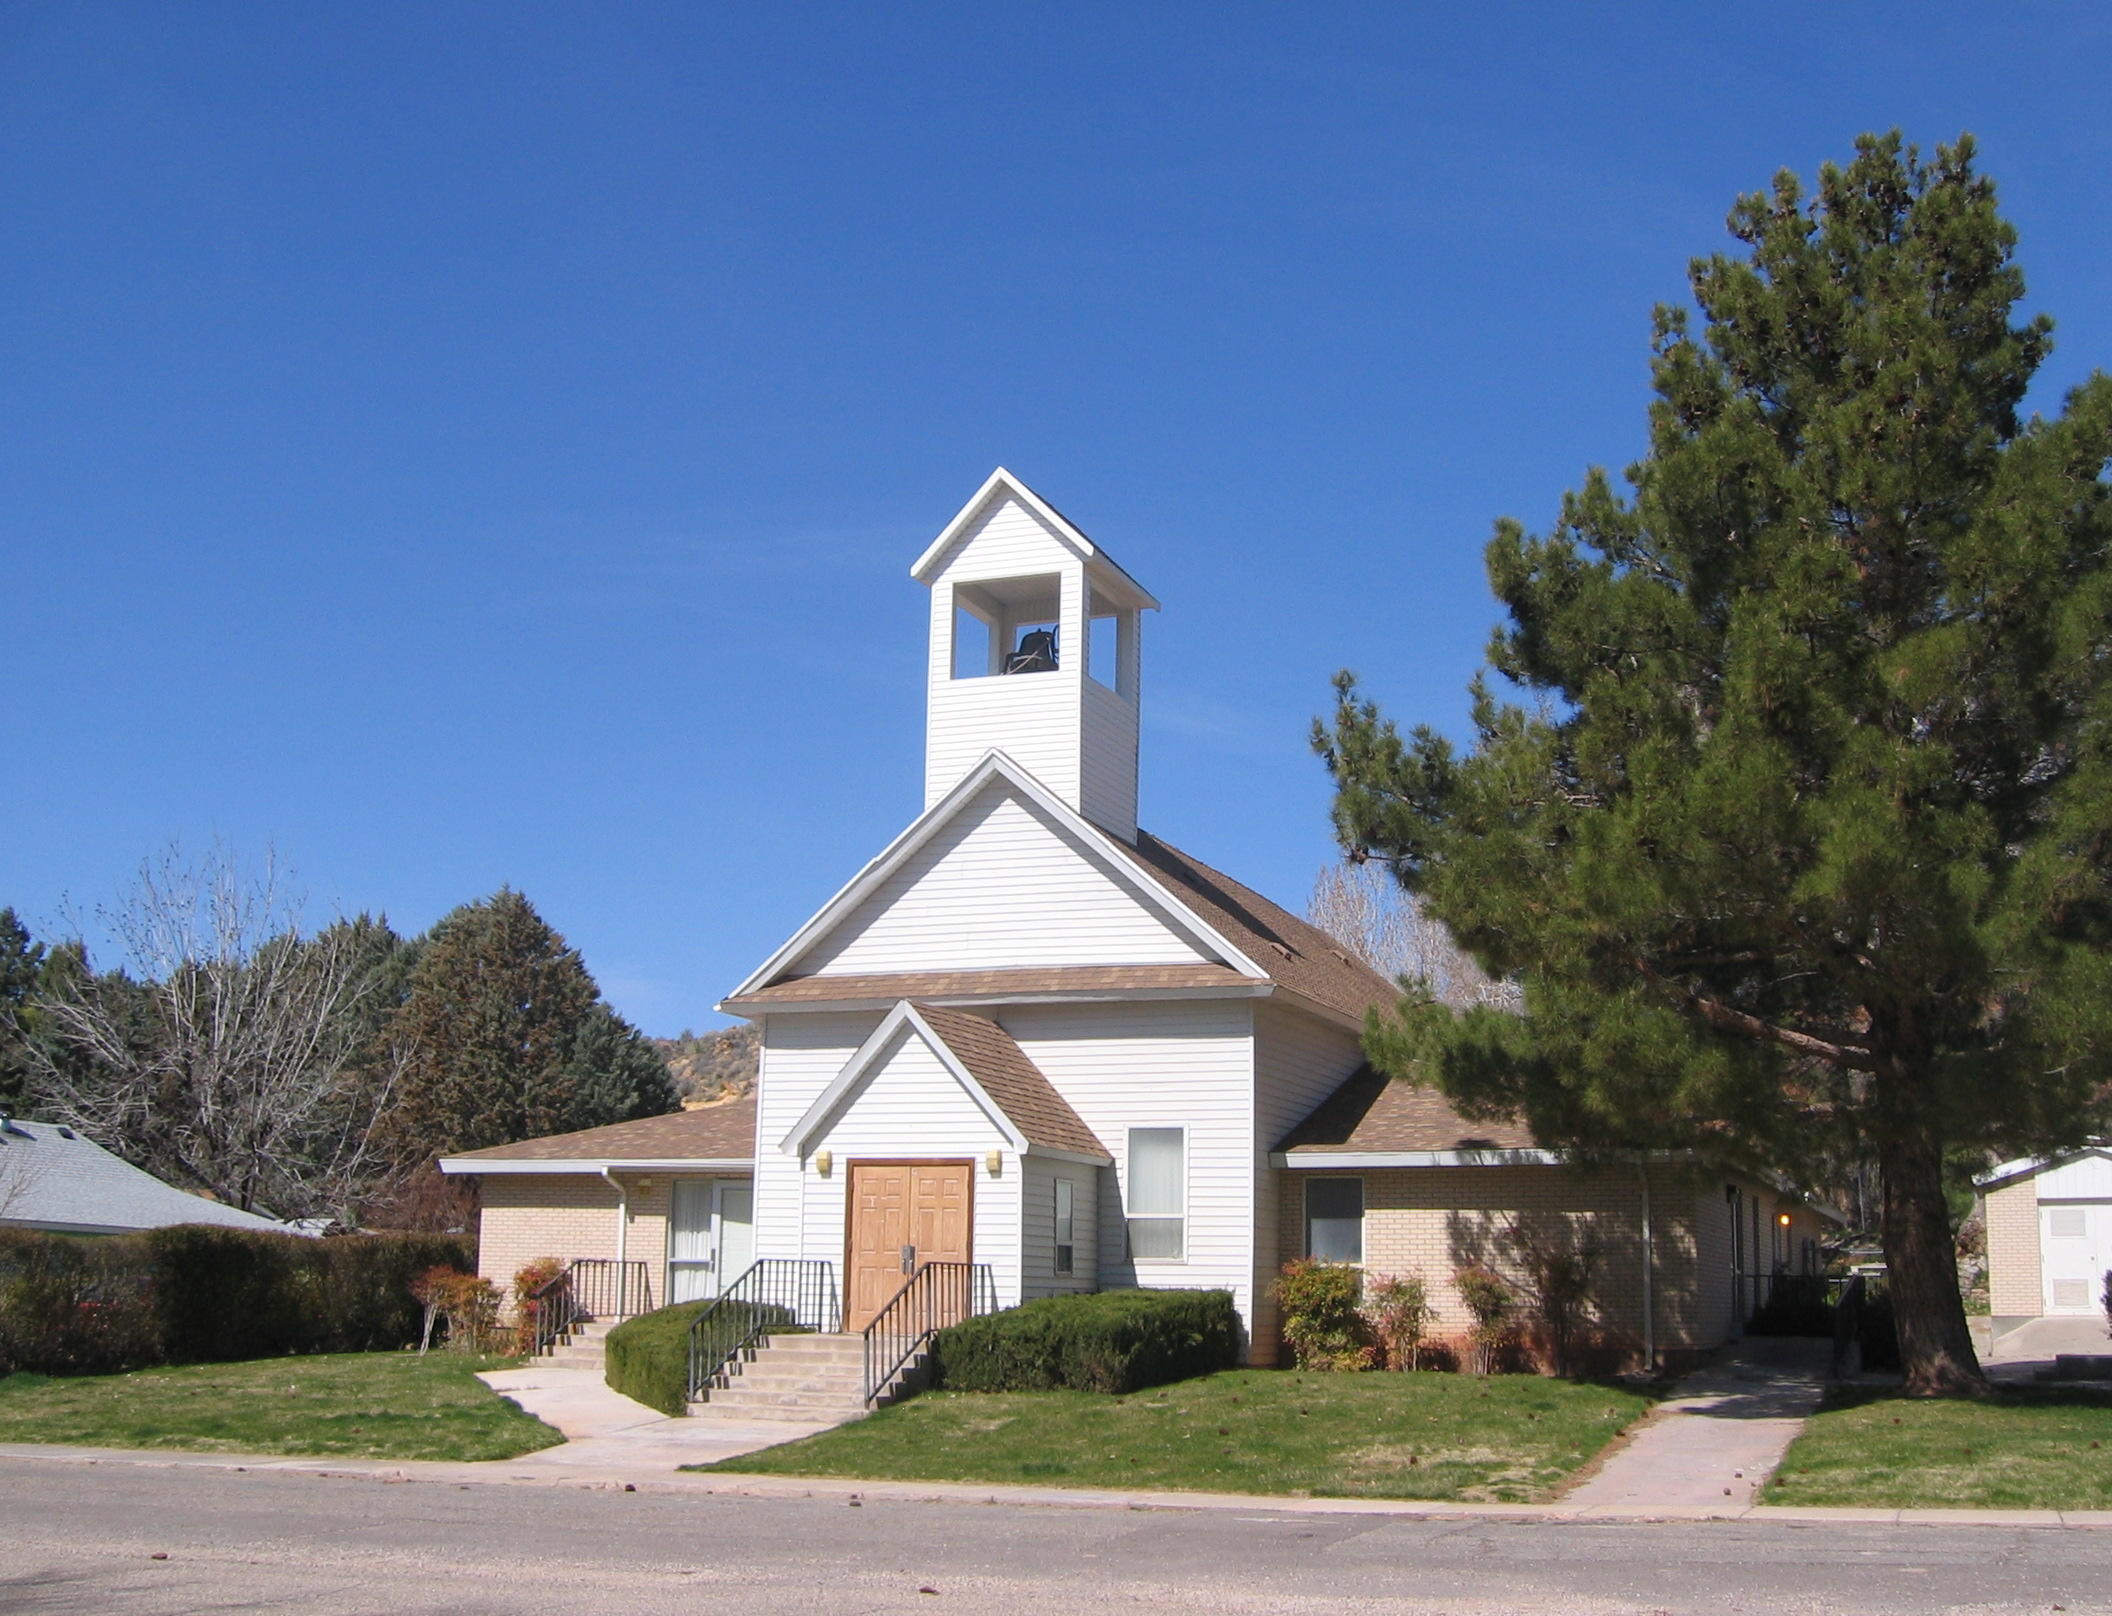 Front of the old Gunlock church building